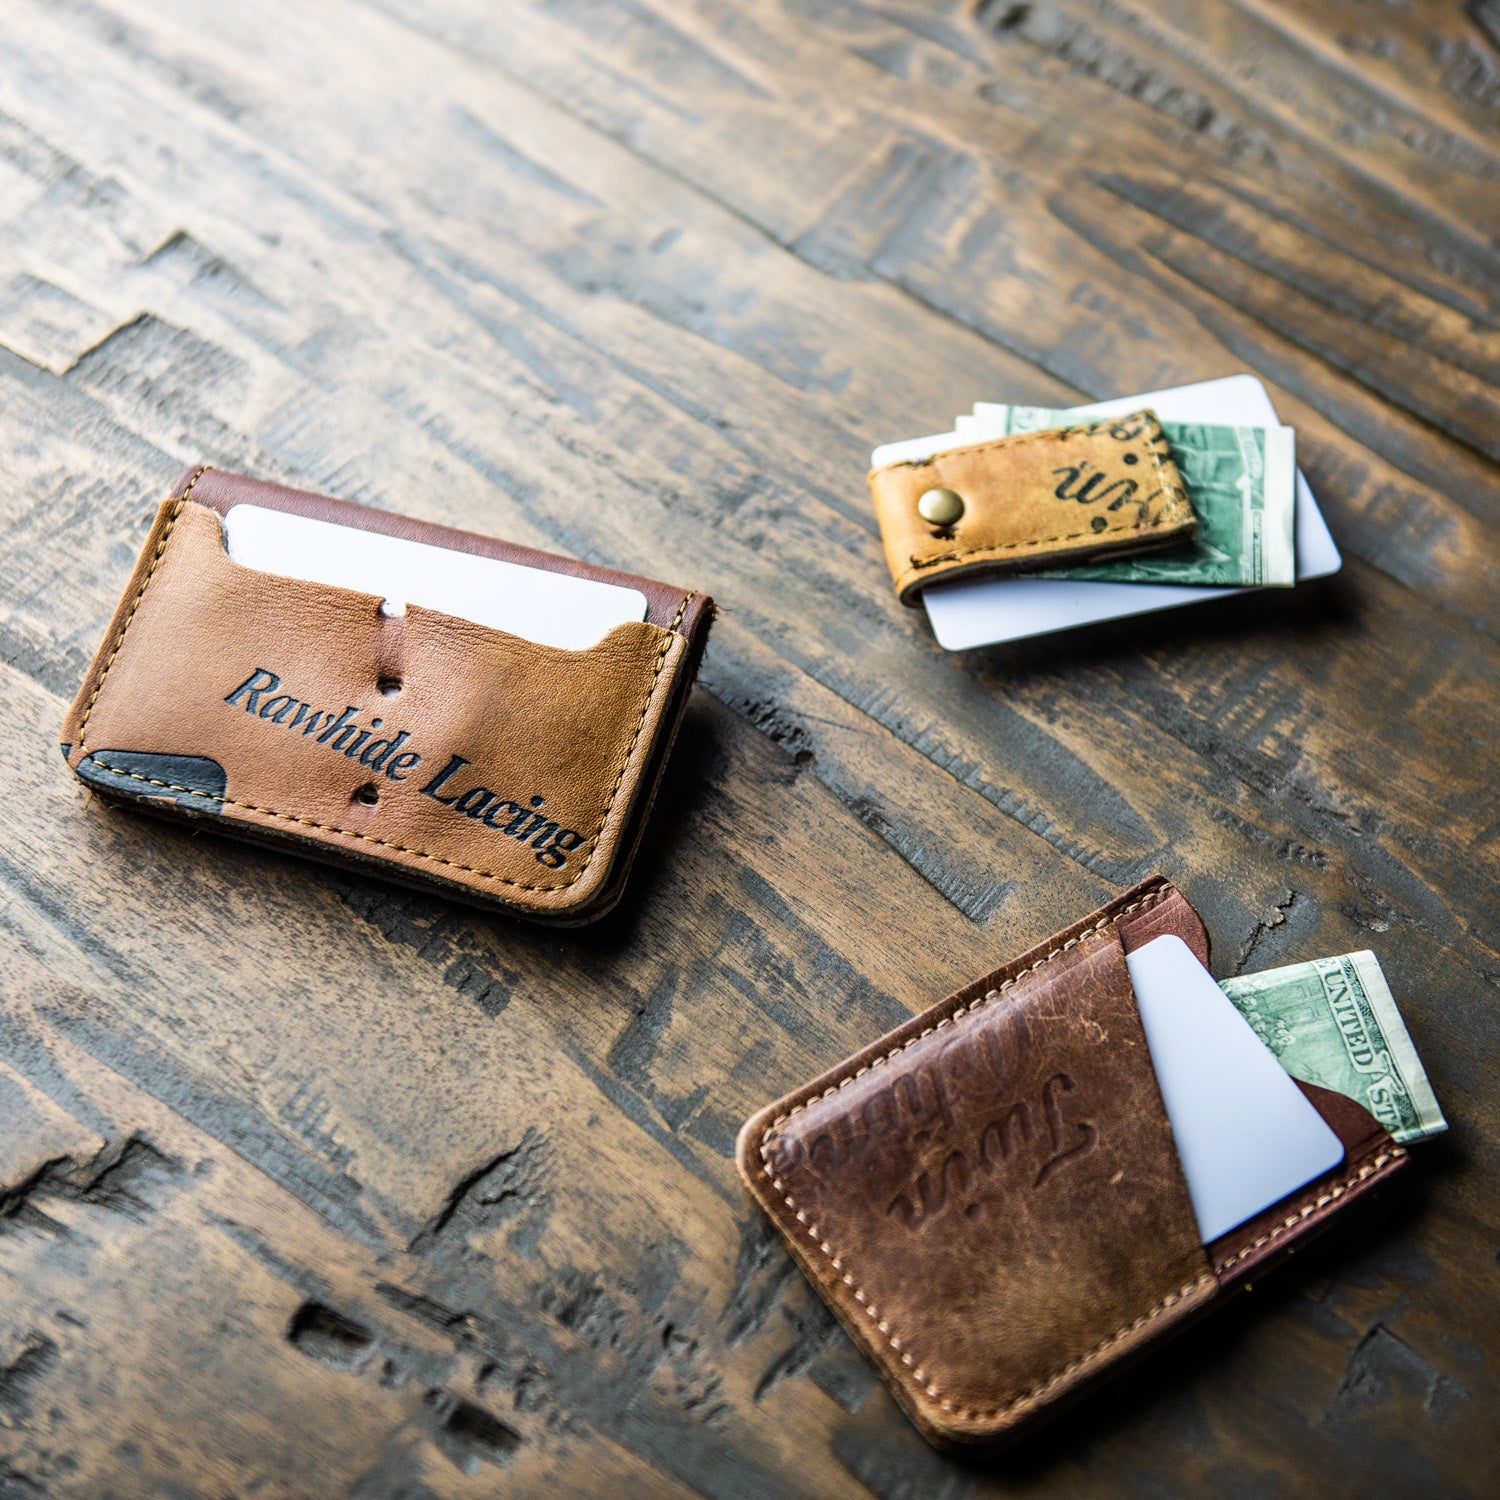 Custom Glove Wallet ~ Made from YOUR Baseball Glove! - Holtz Leather